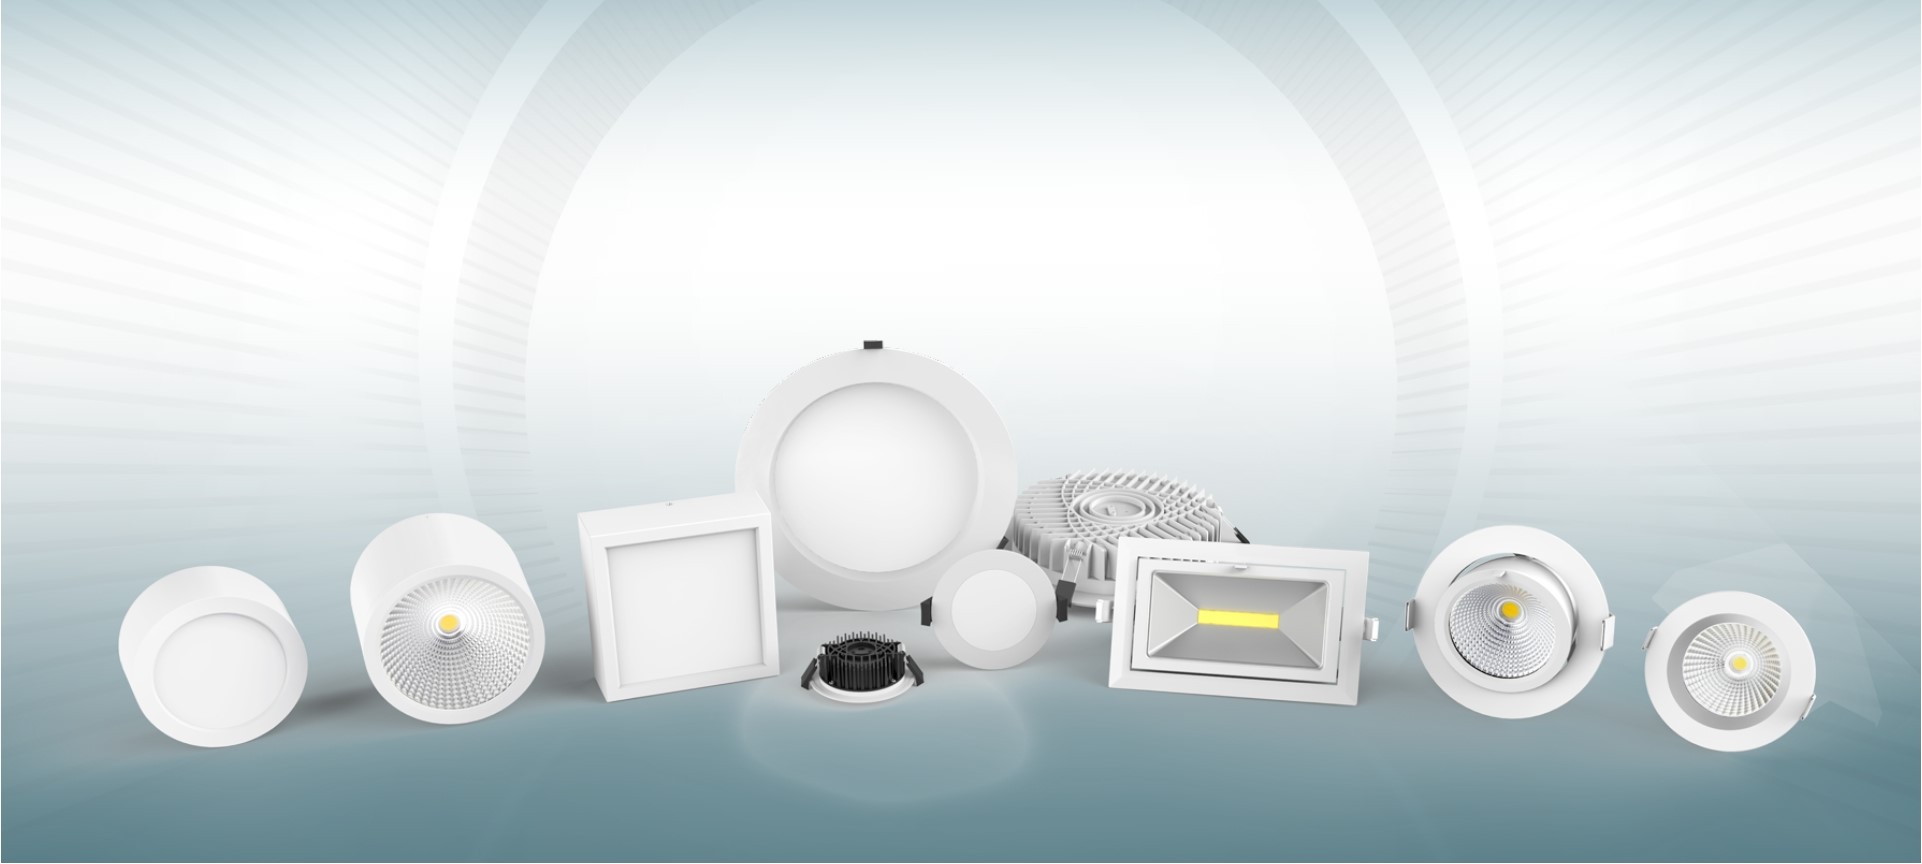 End To End LED Lighting Solutions